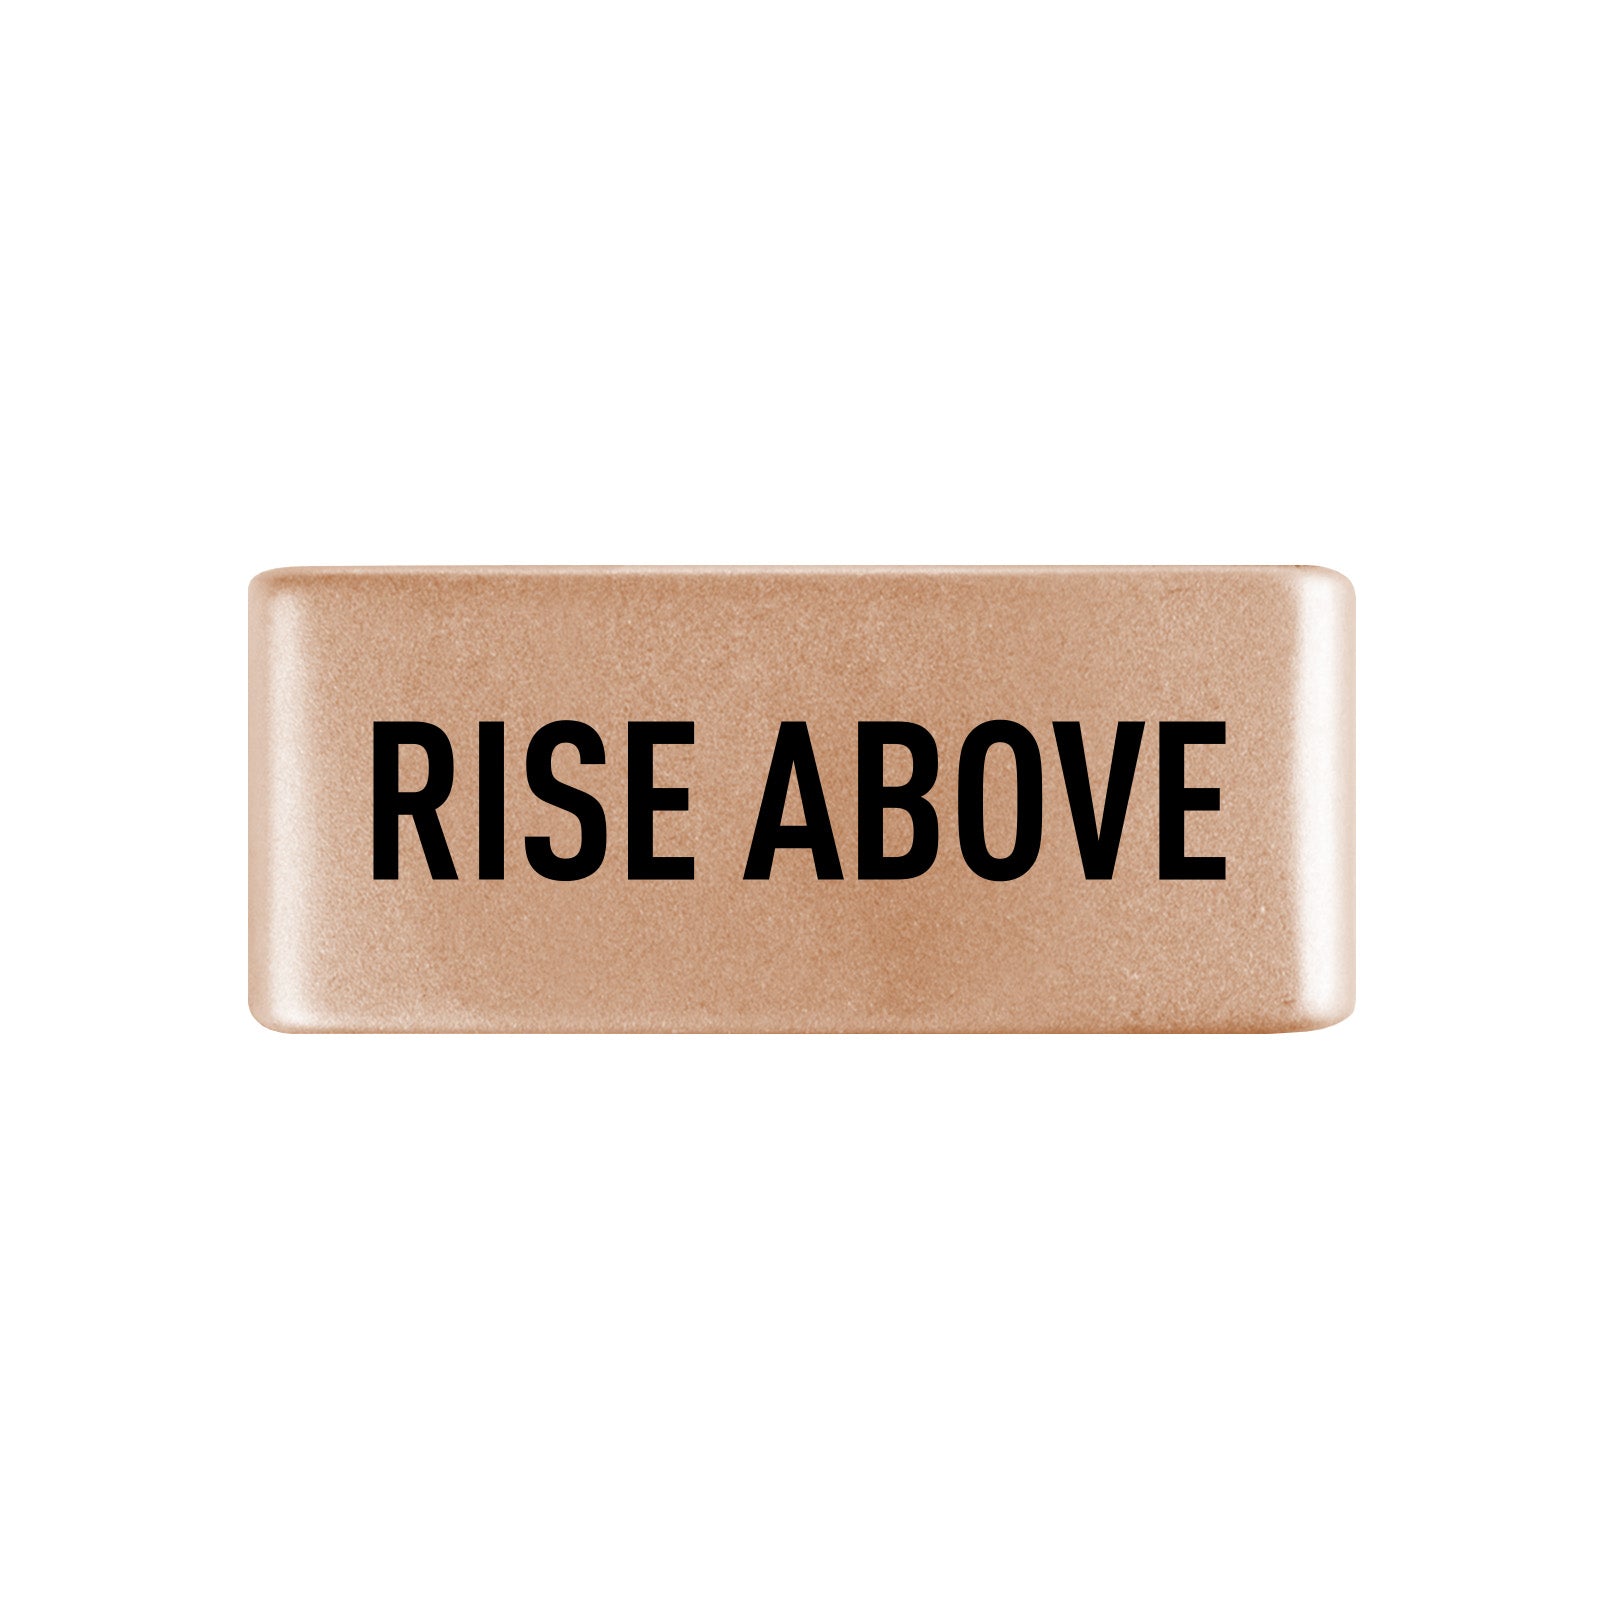 Rise Above Badge Badge 13mm - ROAD iD